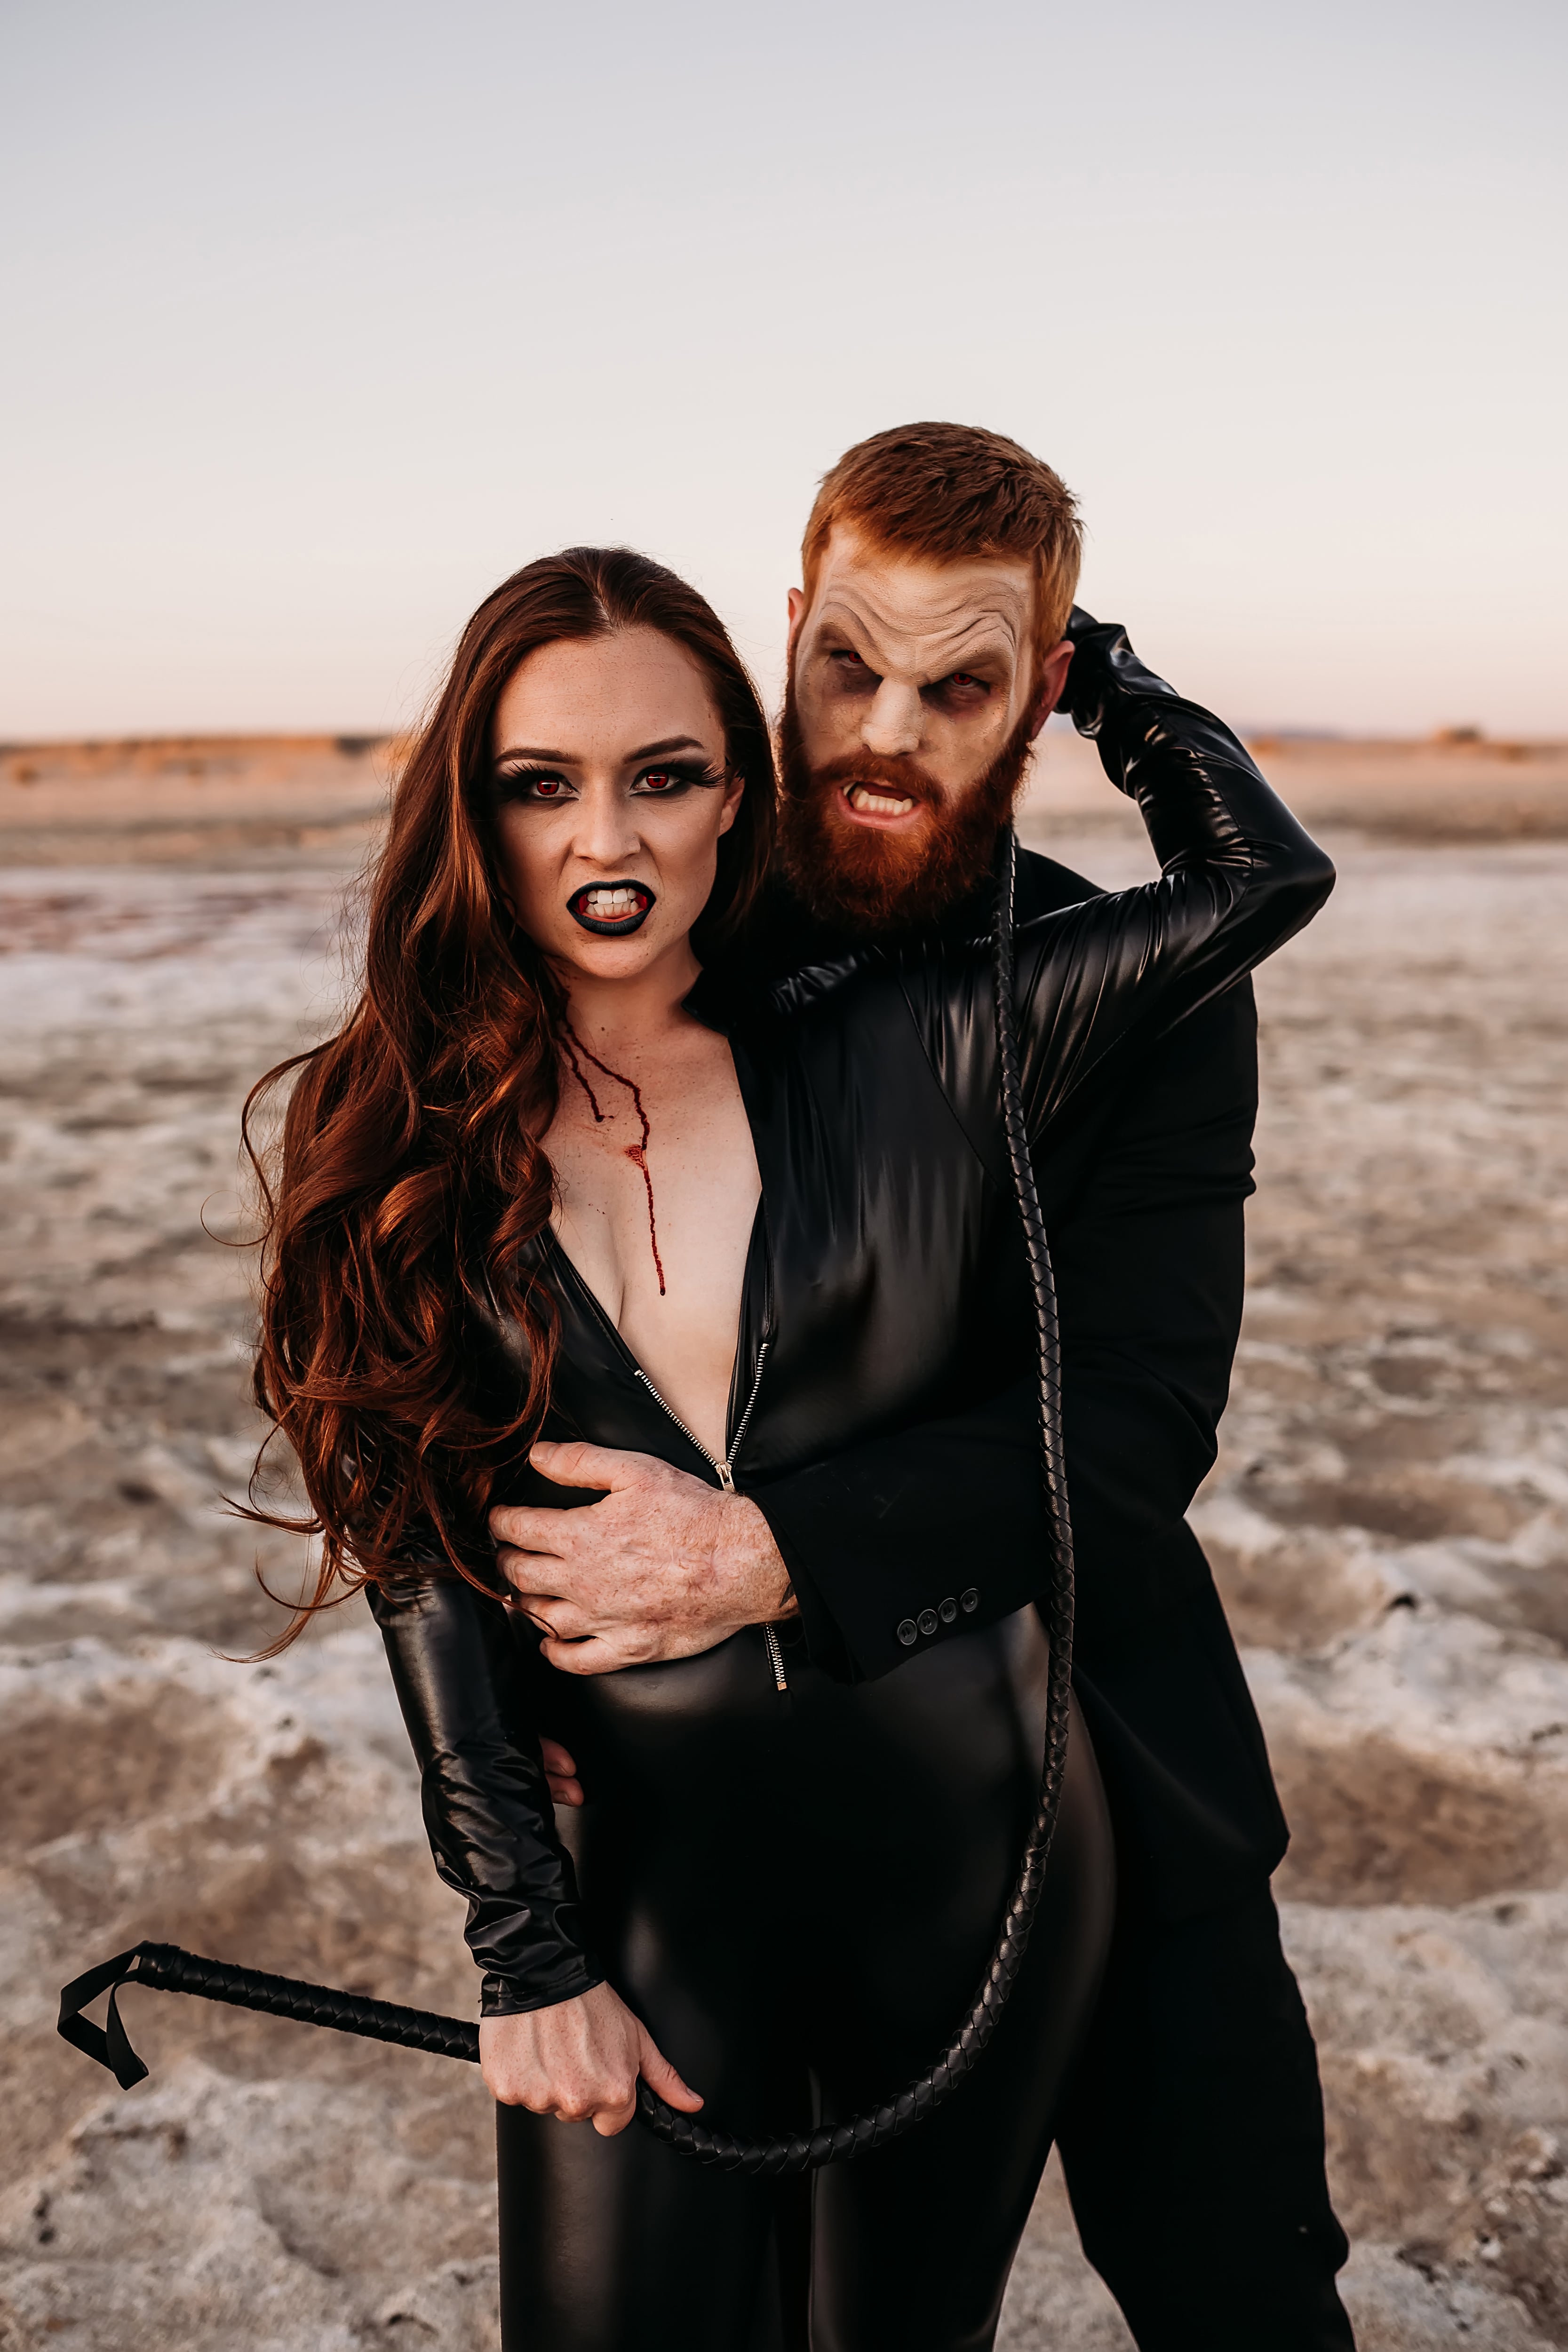 Vampire Dominatrix Porn - This Vampire-Themed Engagement Shoot Is Sexy and Scary | POPSUGAR Love & Sex